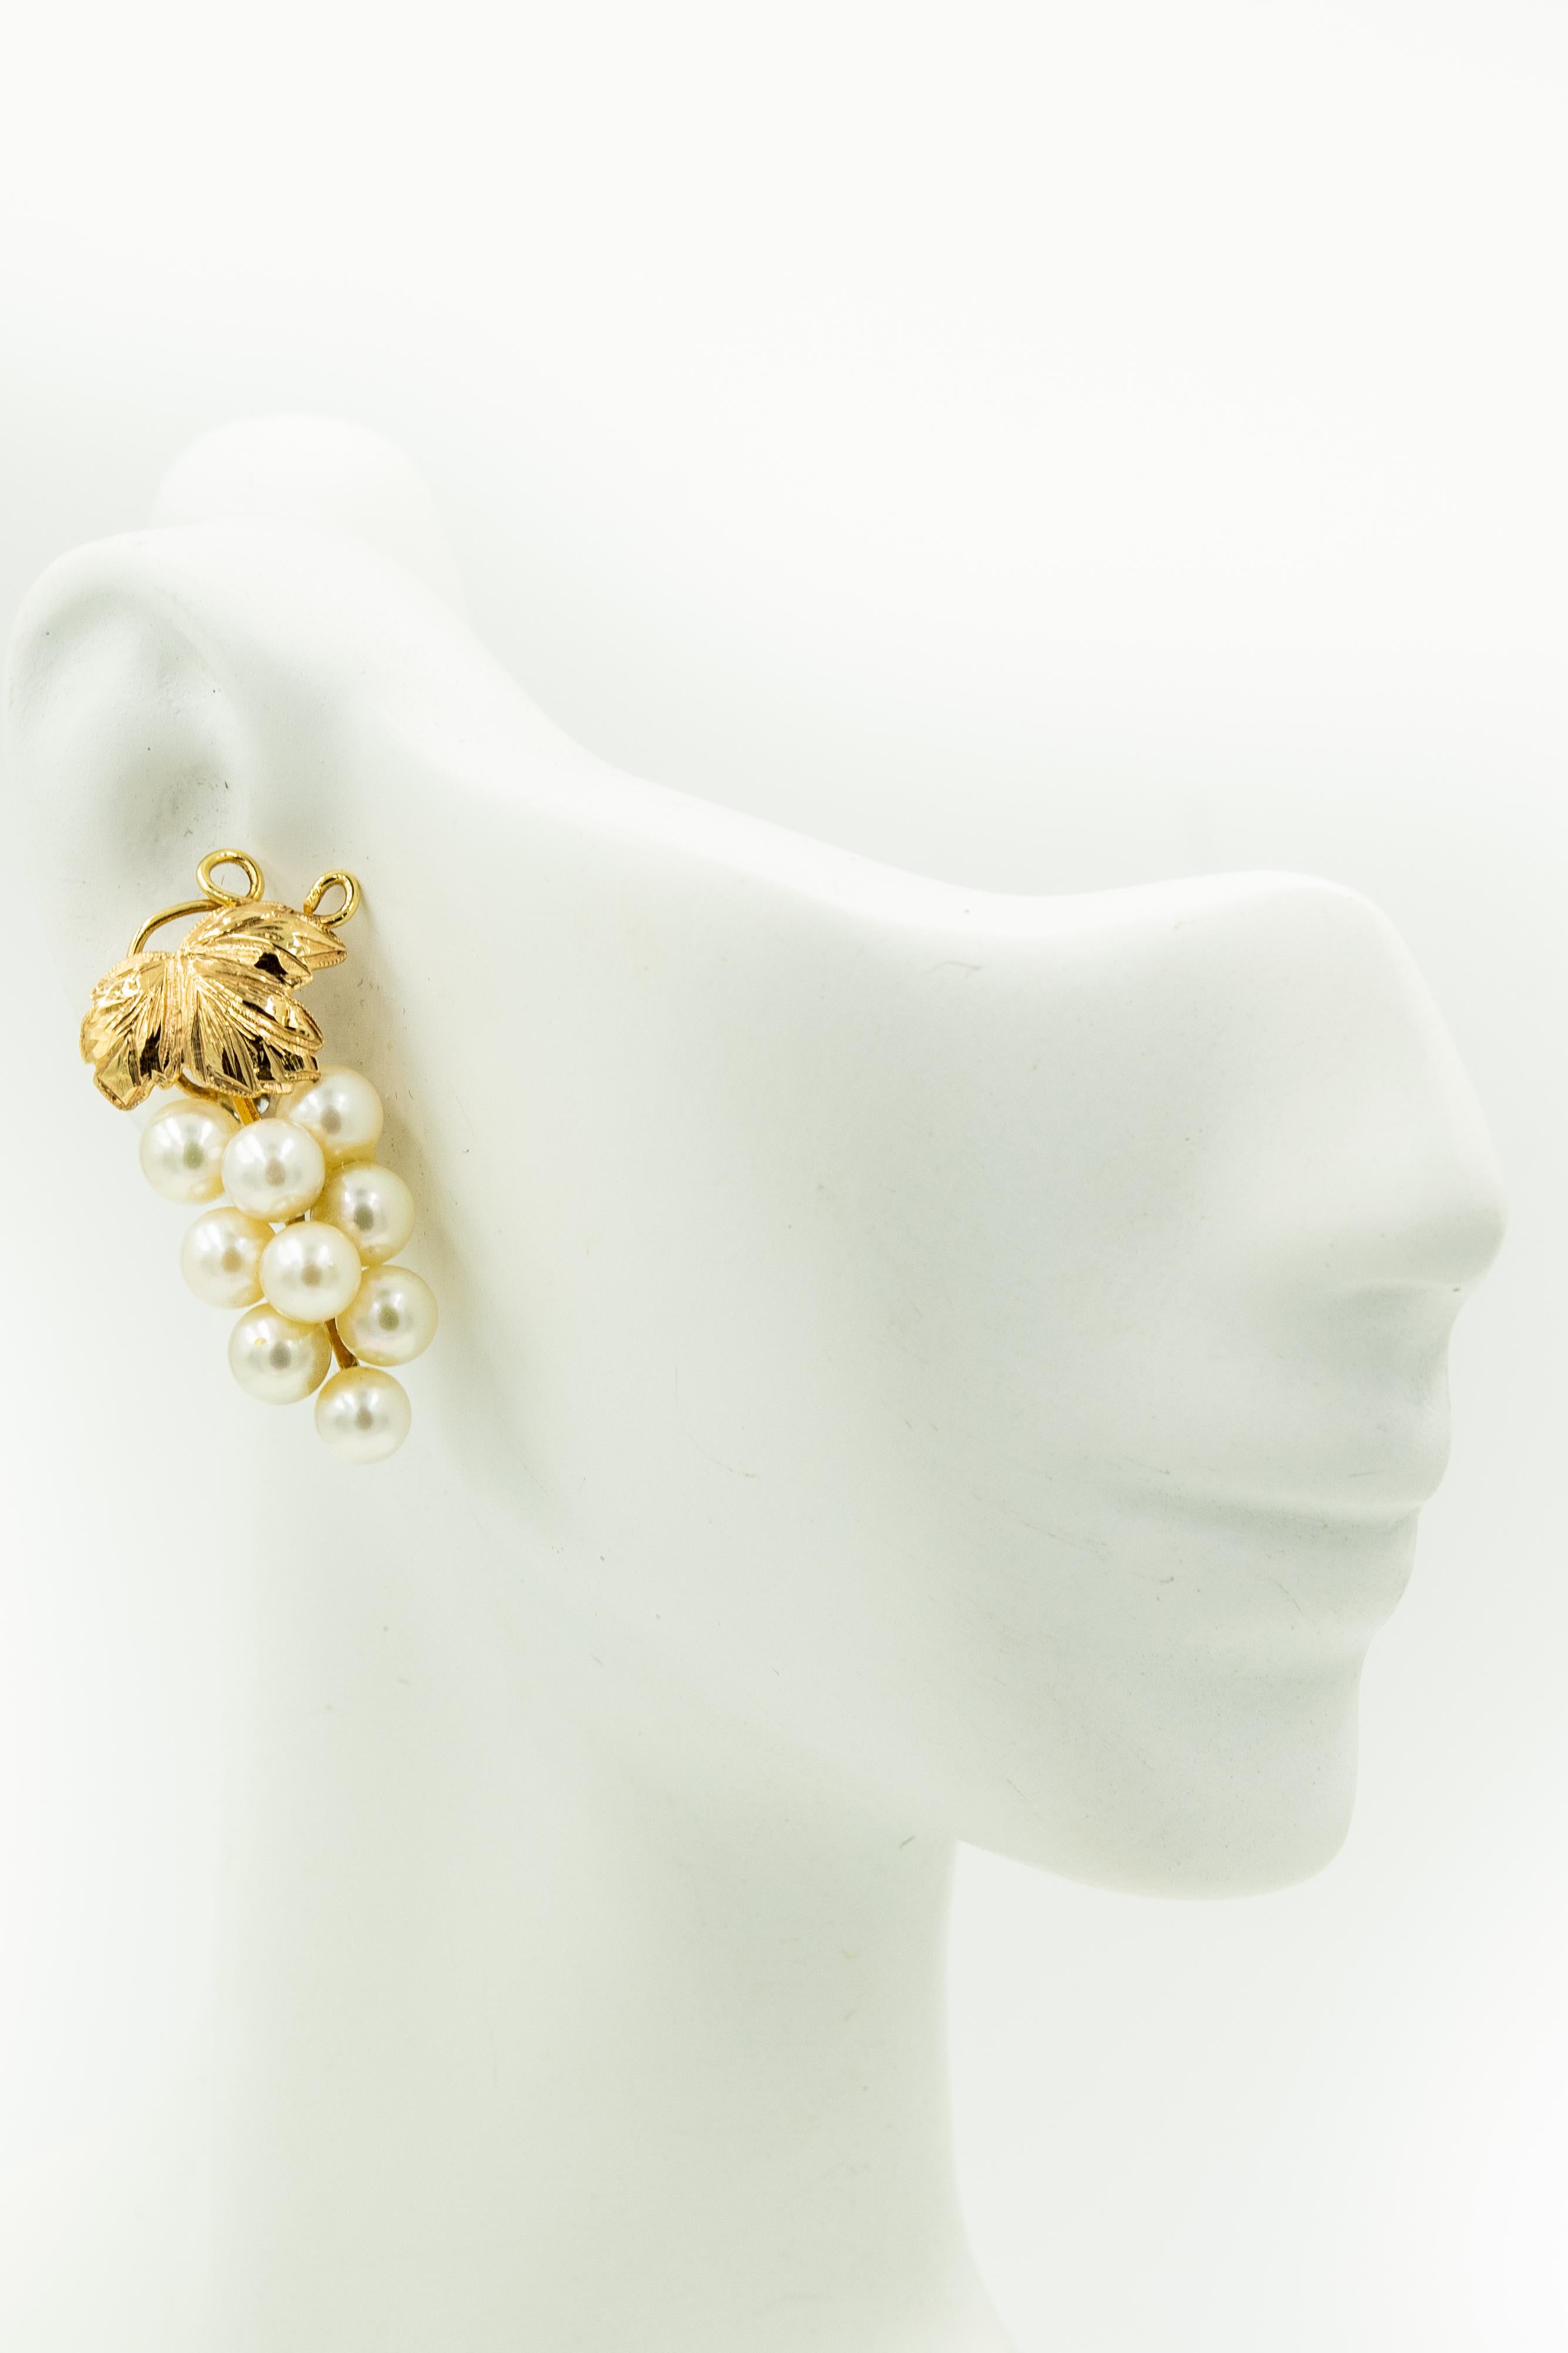 Bead Cultured Pearl Grape Cluster with Yellow Gold Vines and Leaves Earrings